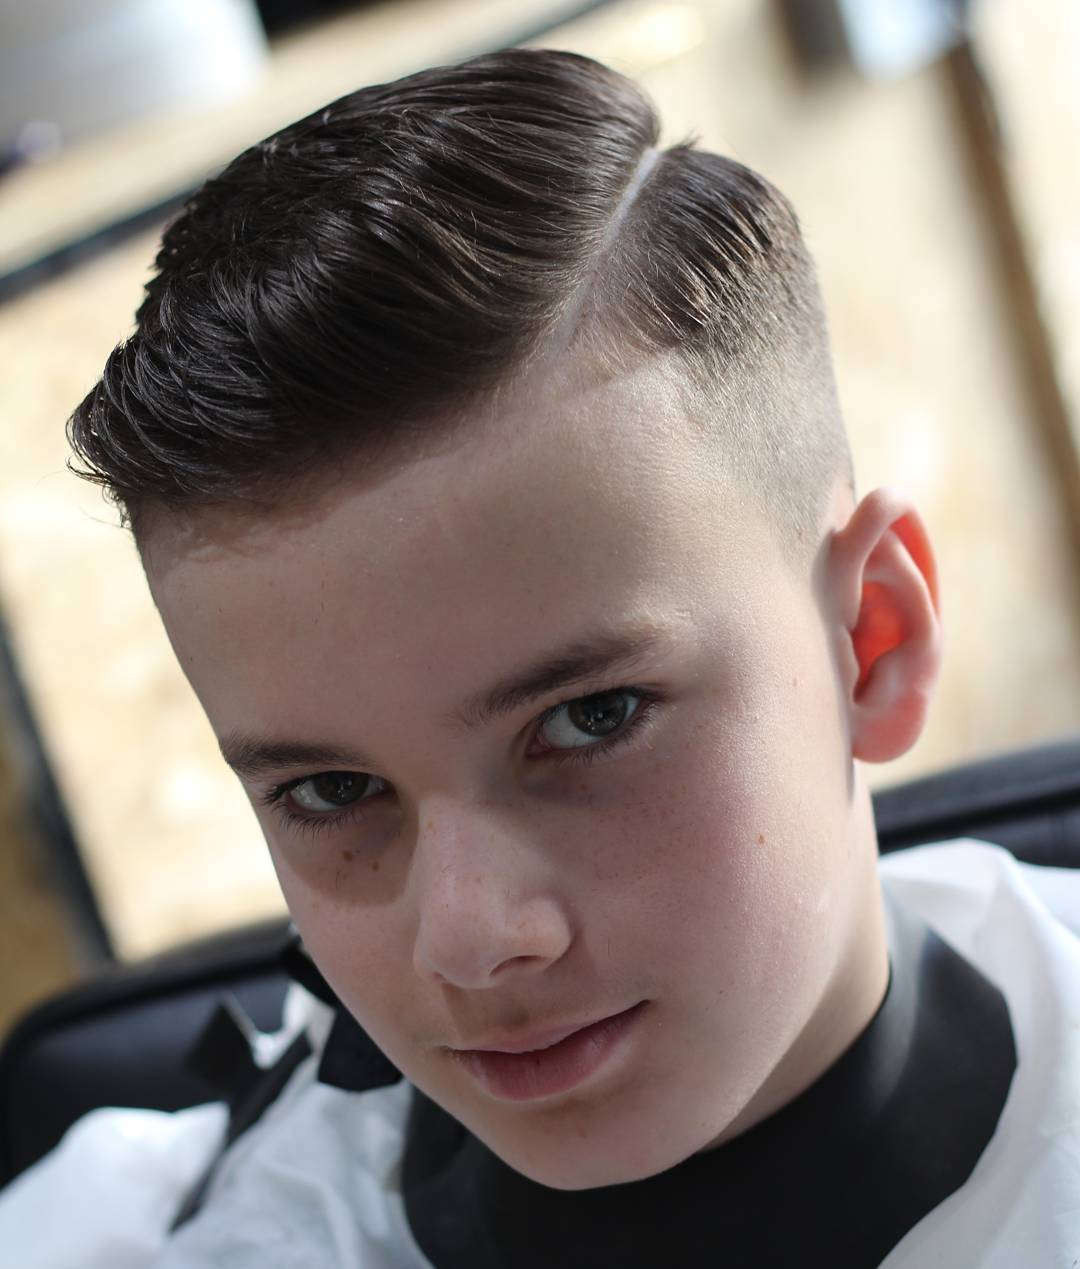 Best Kids Haircuts
 50 Best Hairstyles for Teenage Boys The Ultimate Guide 2019